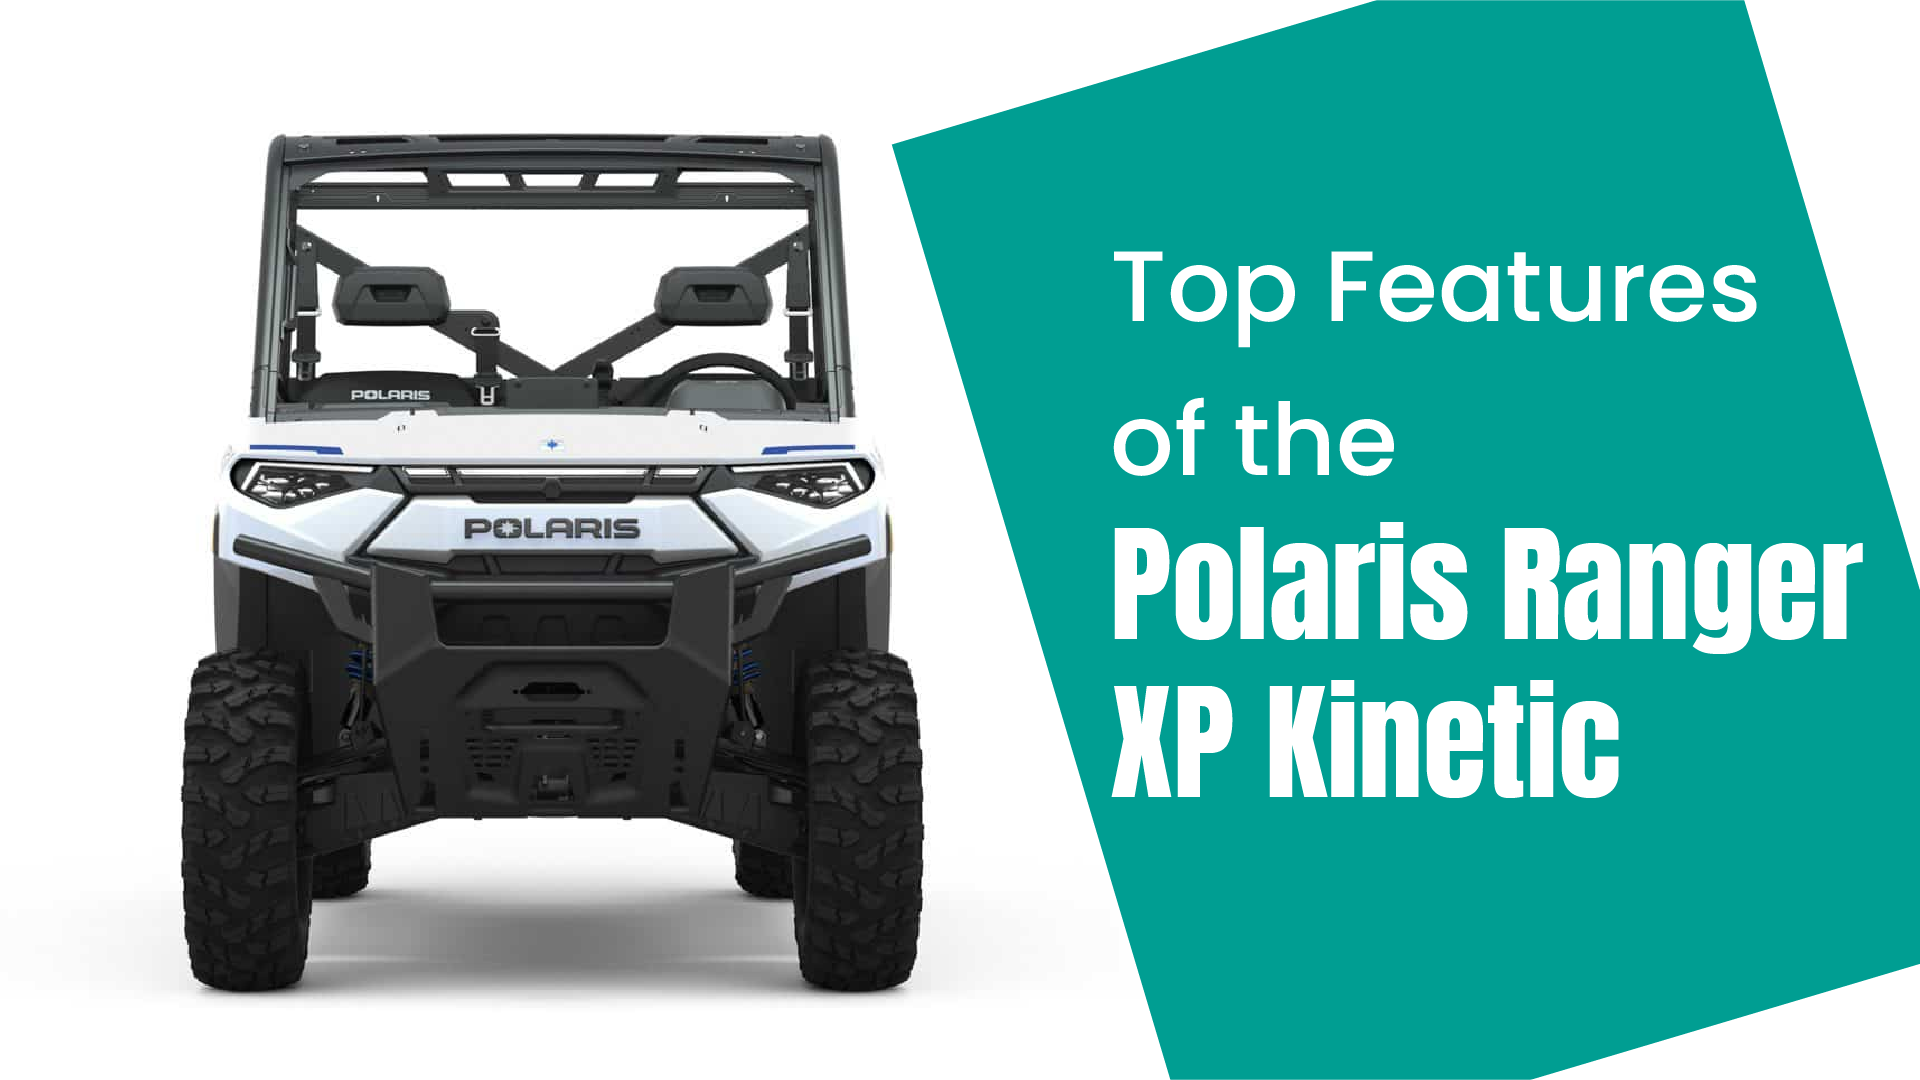 What are the Top Features of the Polaris Ranger XP Kinetic